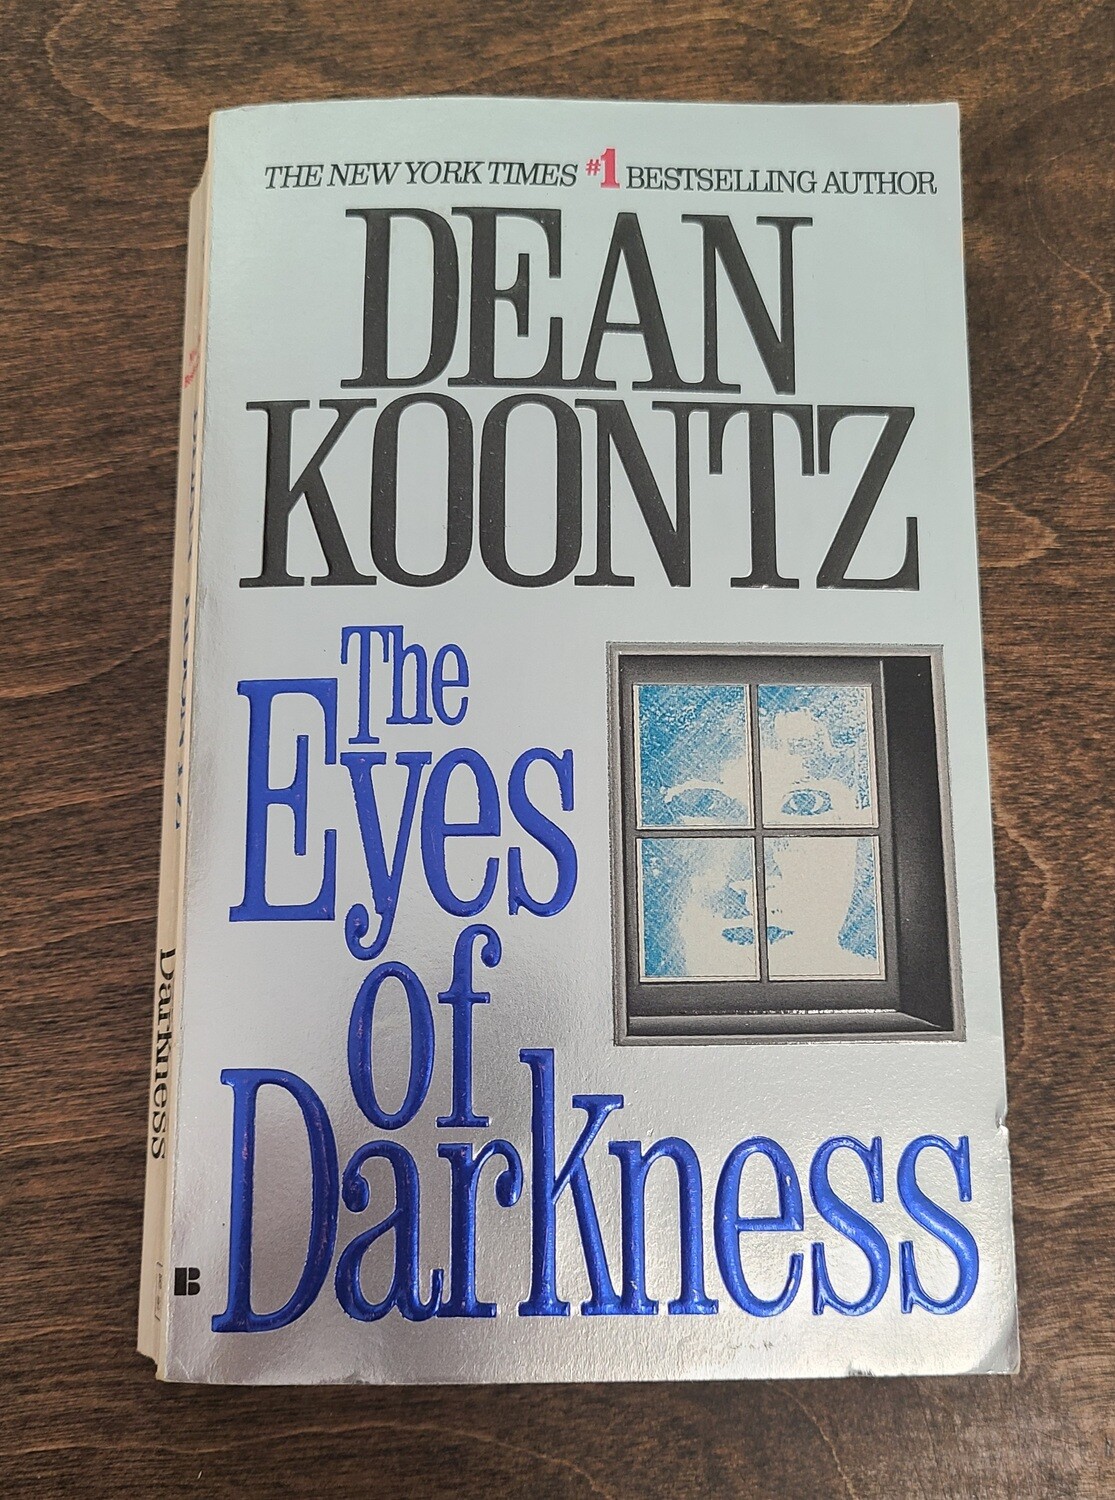 The Eyes of Darkness by Dean Koontz